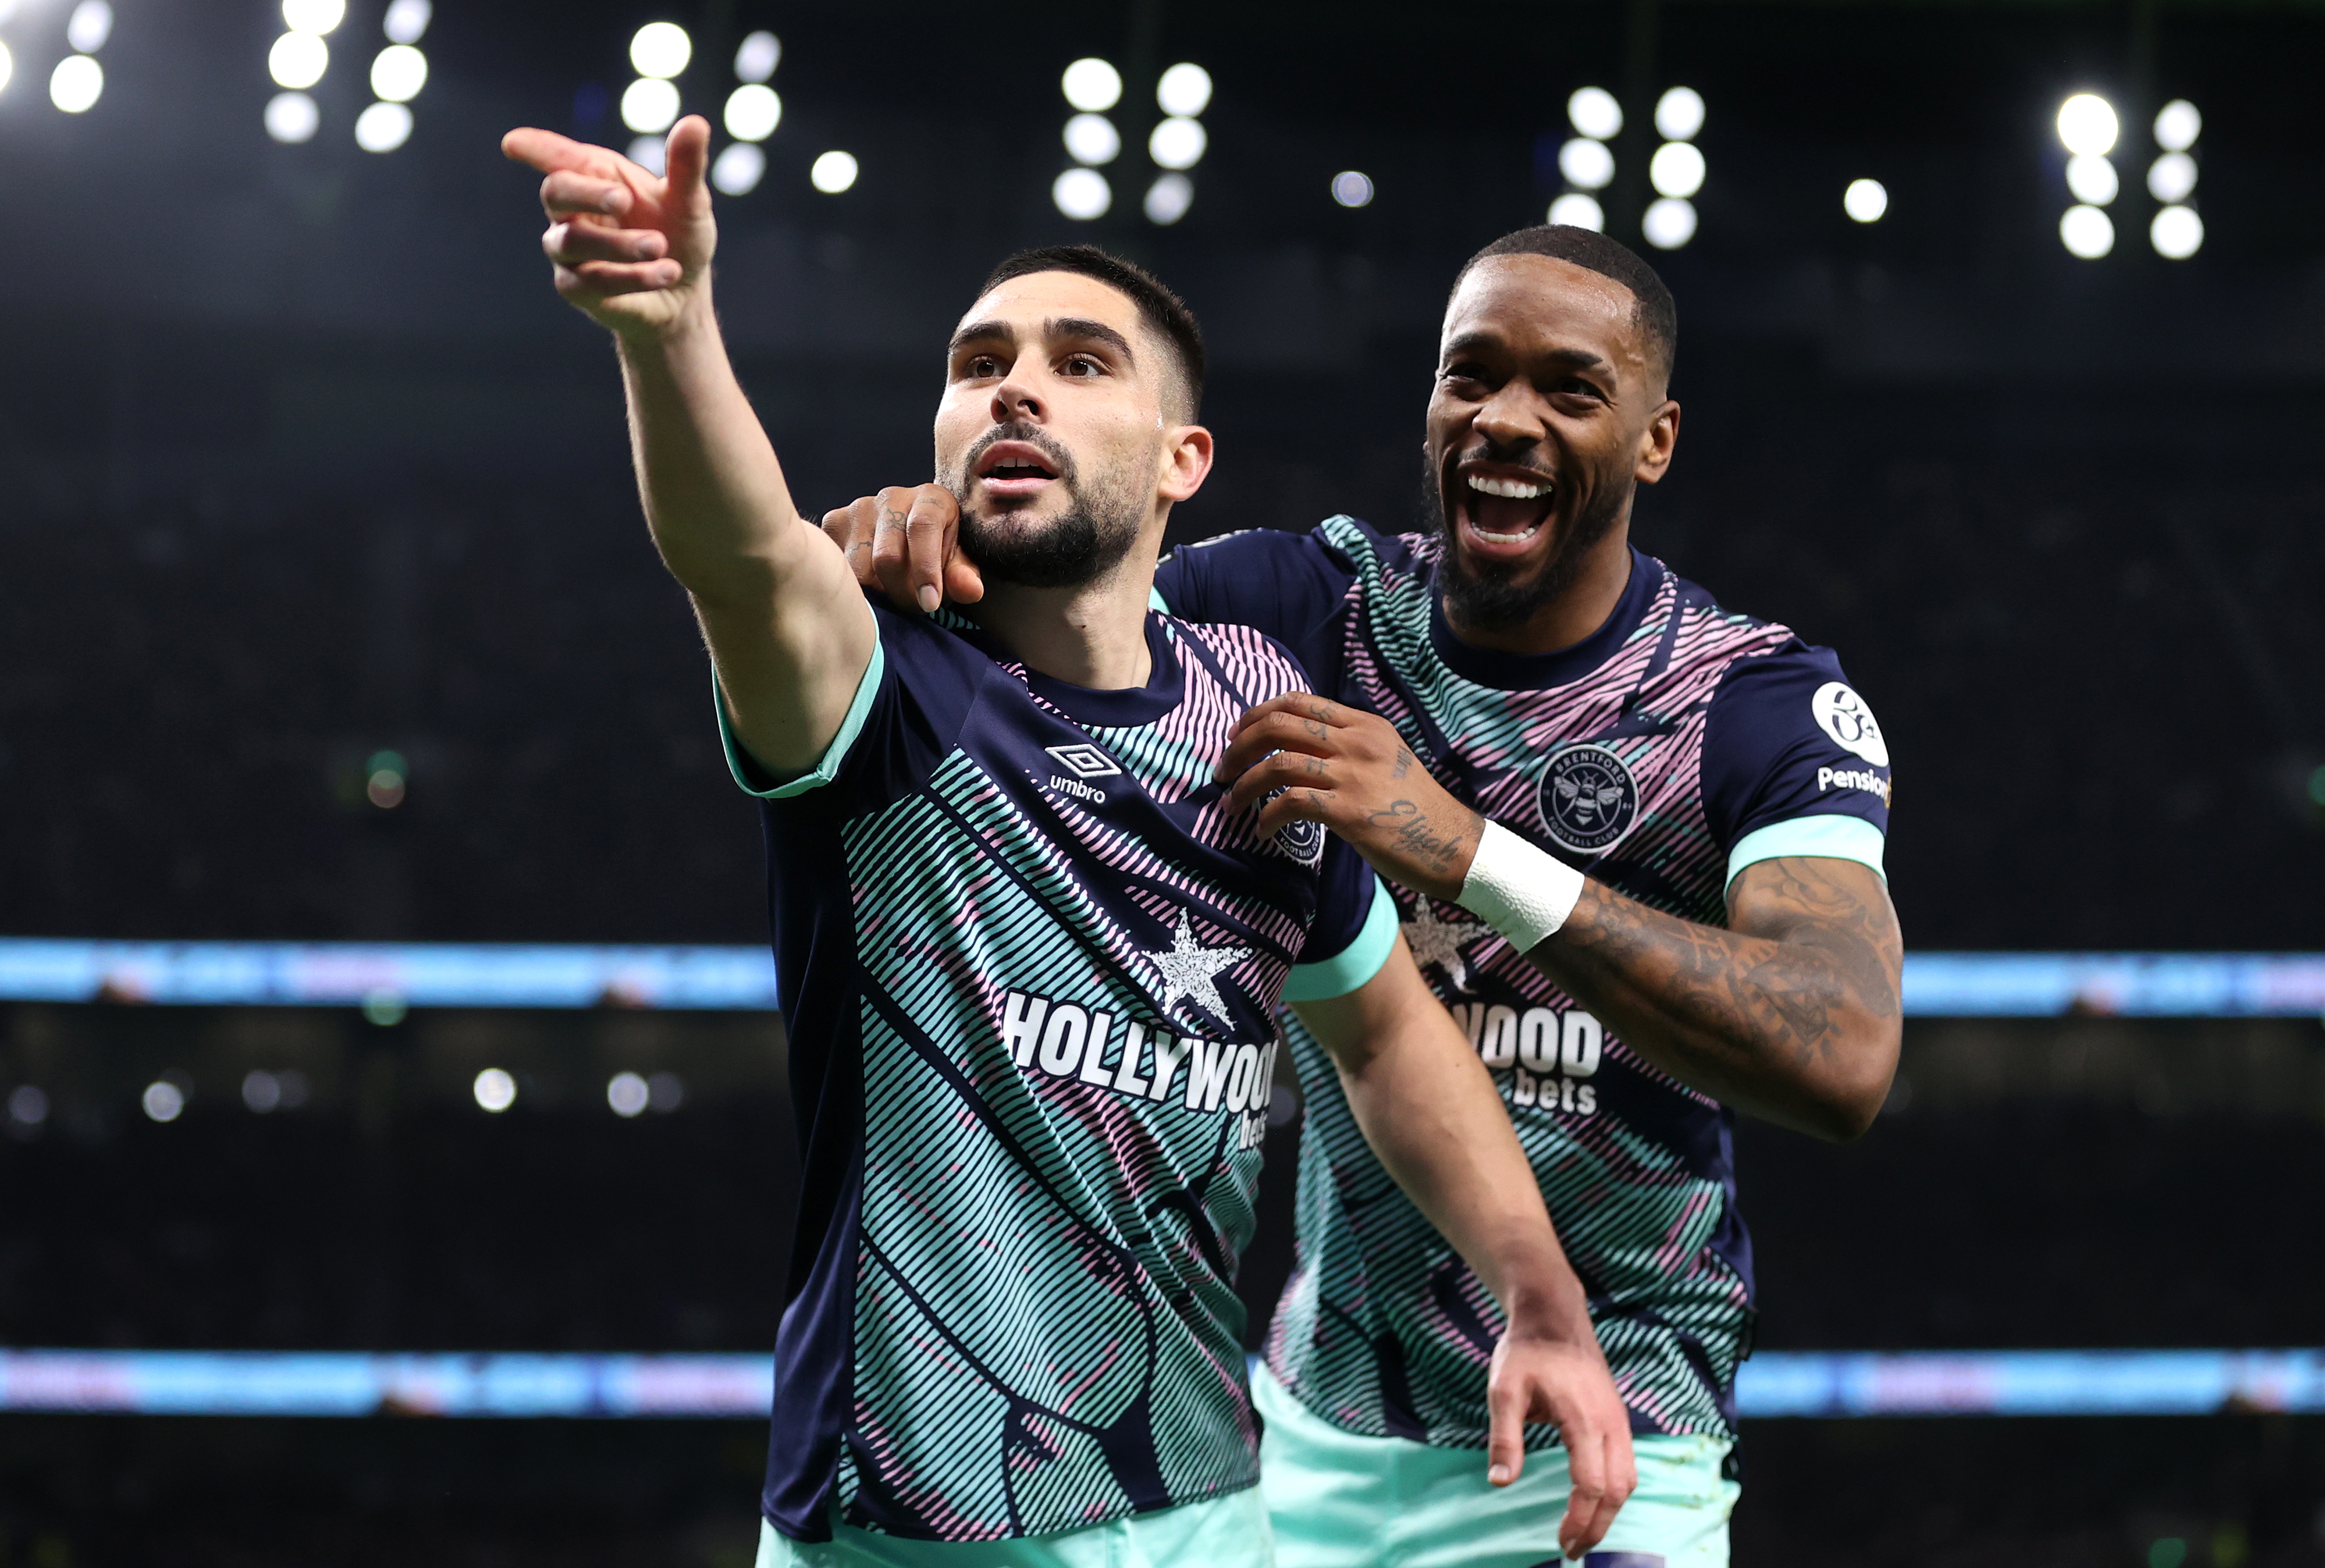 Neal Maupay of Brentford celebrates scoring his team's first goal with team mate Ivan Toney during the Premier League match between Tottenham Hotspur and Brentford FC.